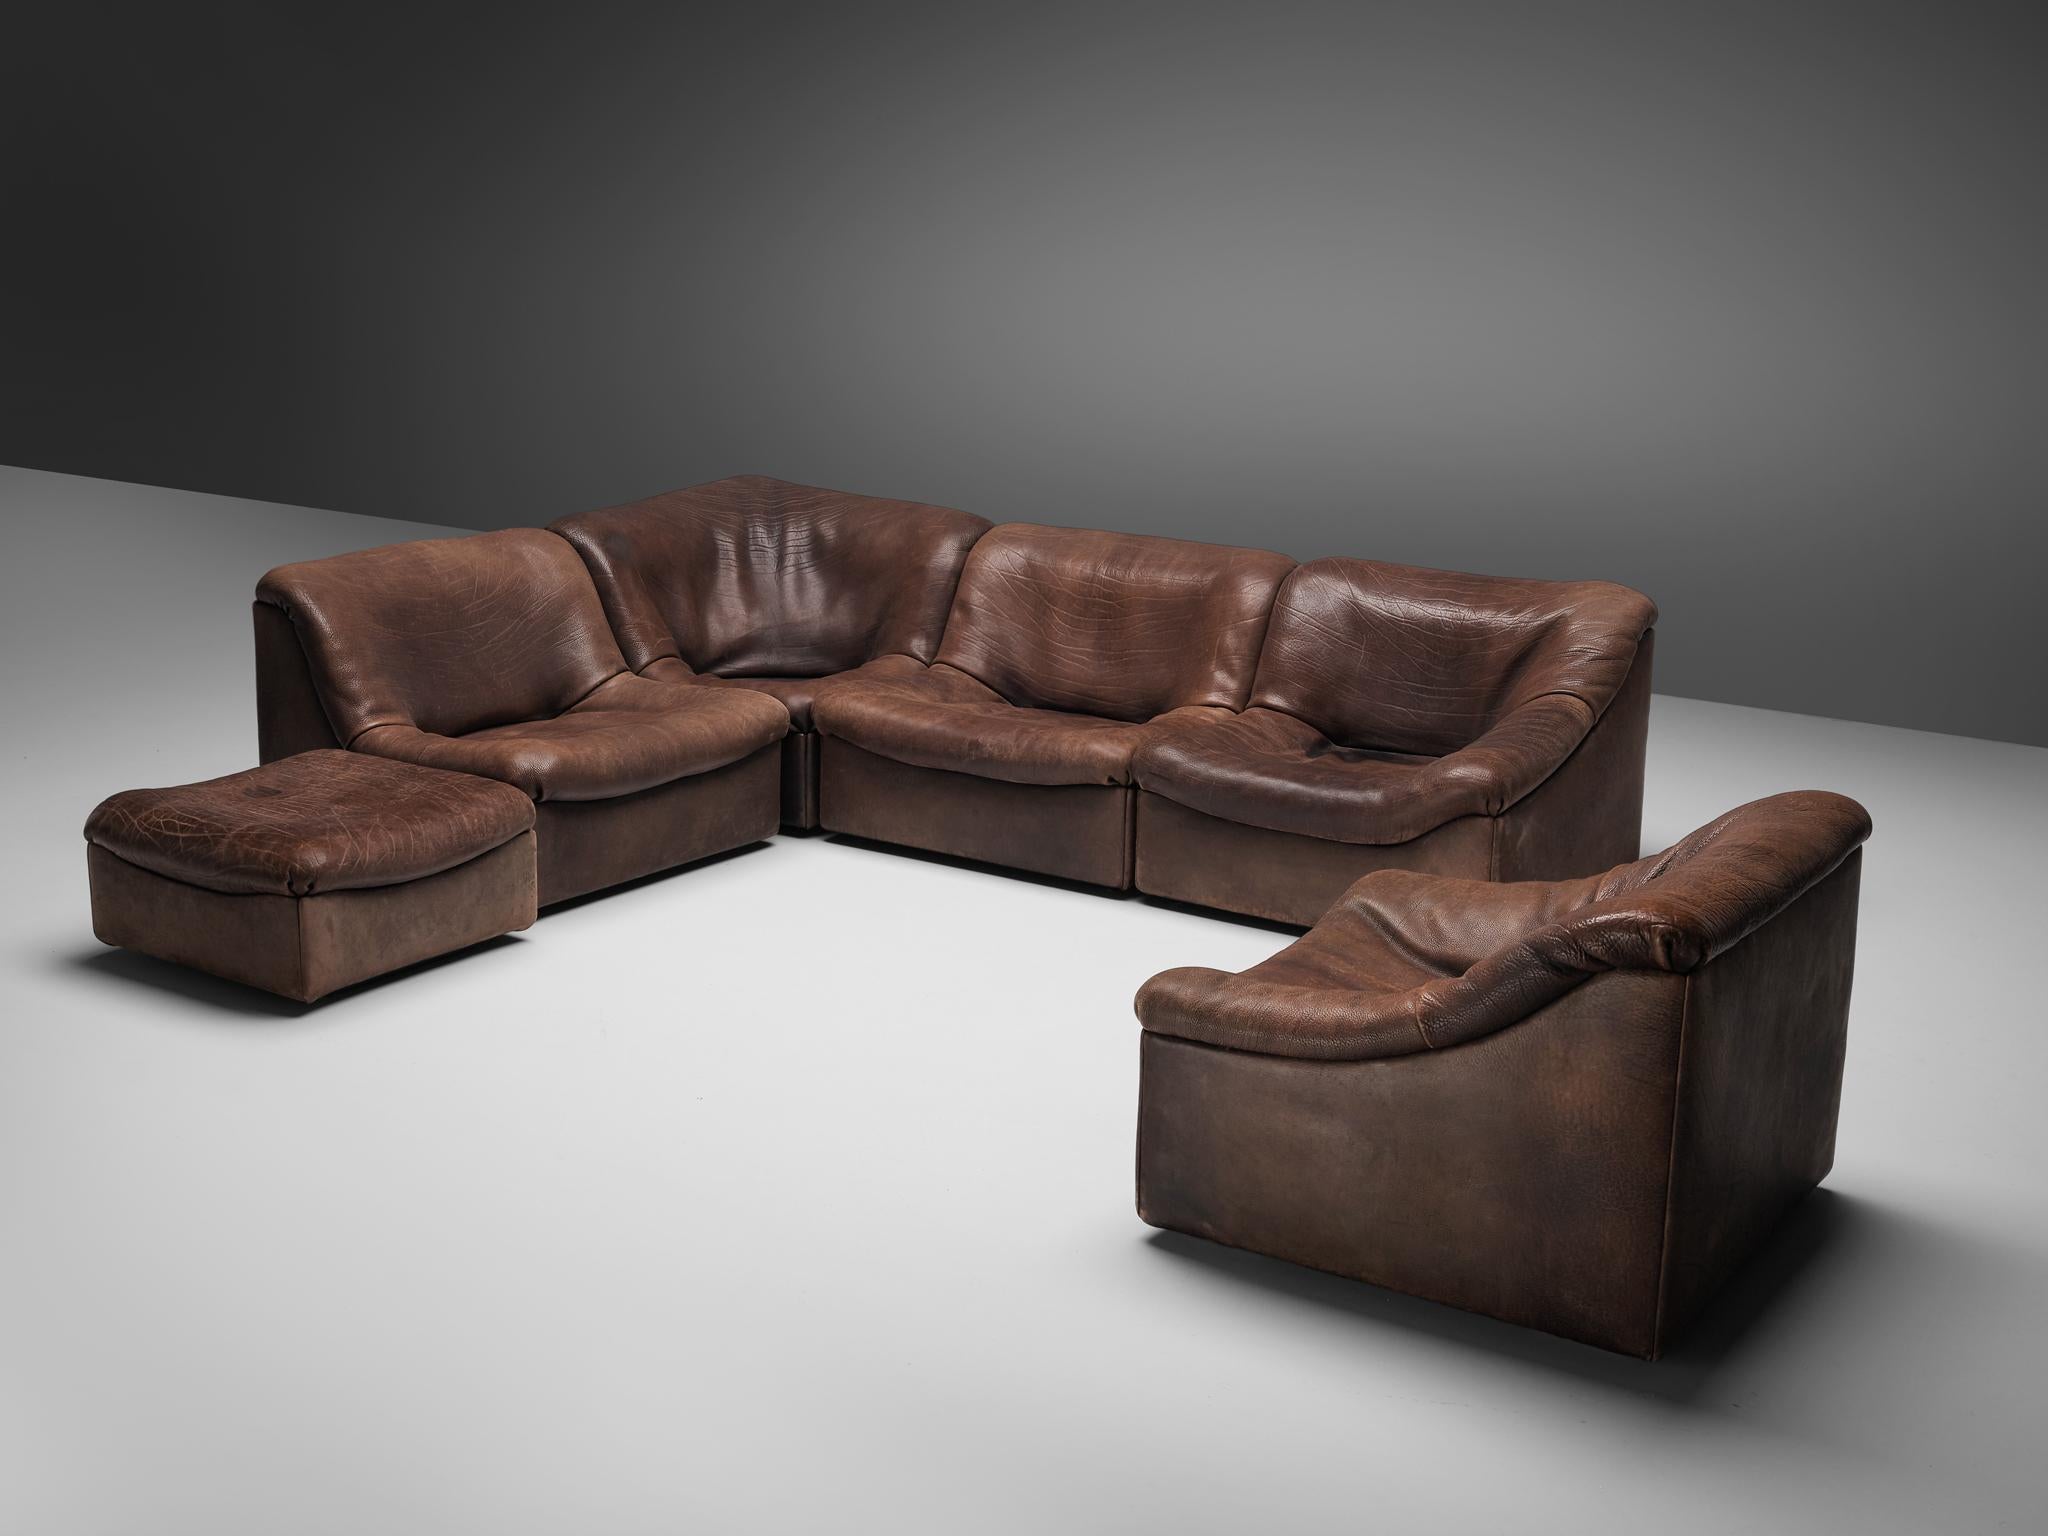 De Sede, DS46 sectional sofa with ottoman, brown buffalo leather, Switzerland, 1970s.

Comfortable six-modular sectional sofa with ottoman in thick buffalo leather by DeSede. This model features a solid base with a rounded, bulky seat and a high